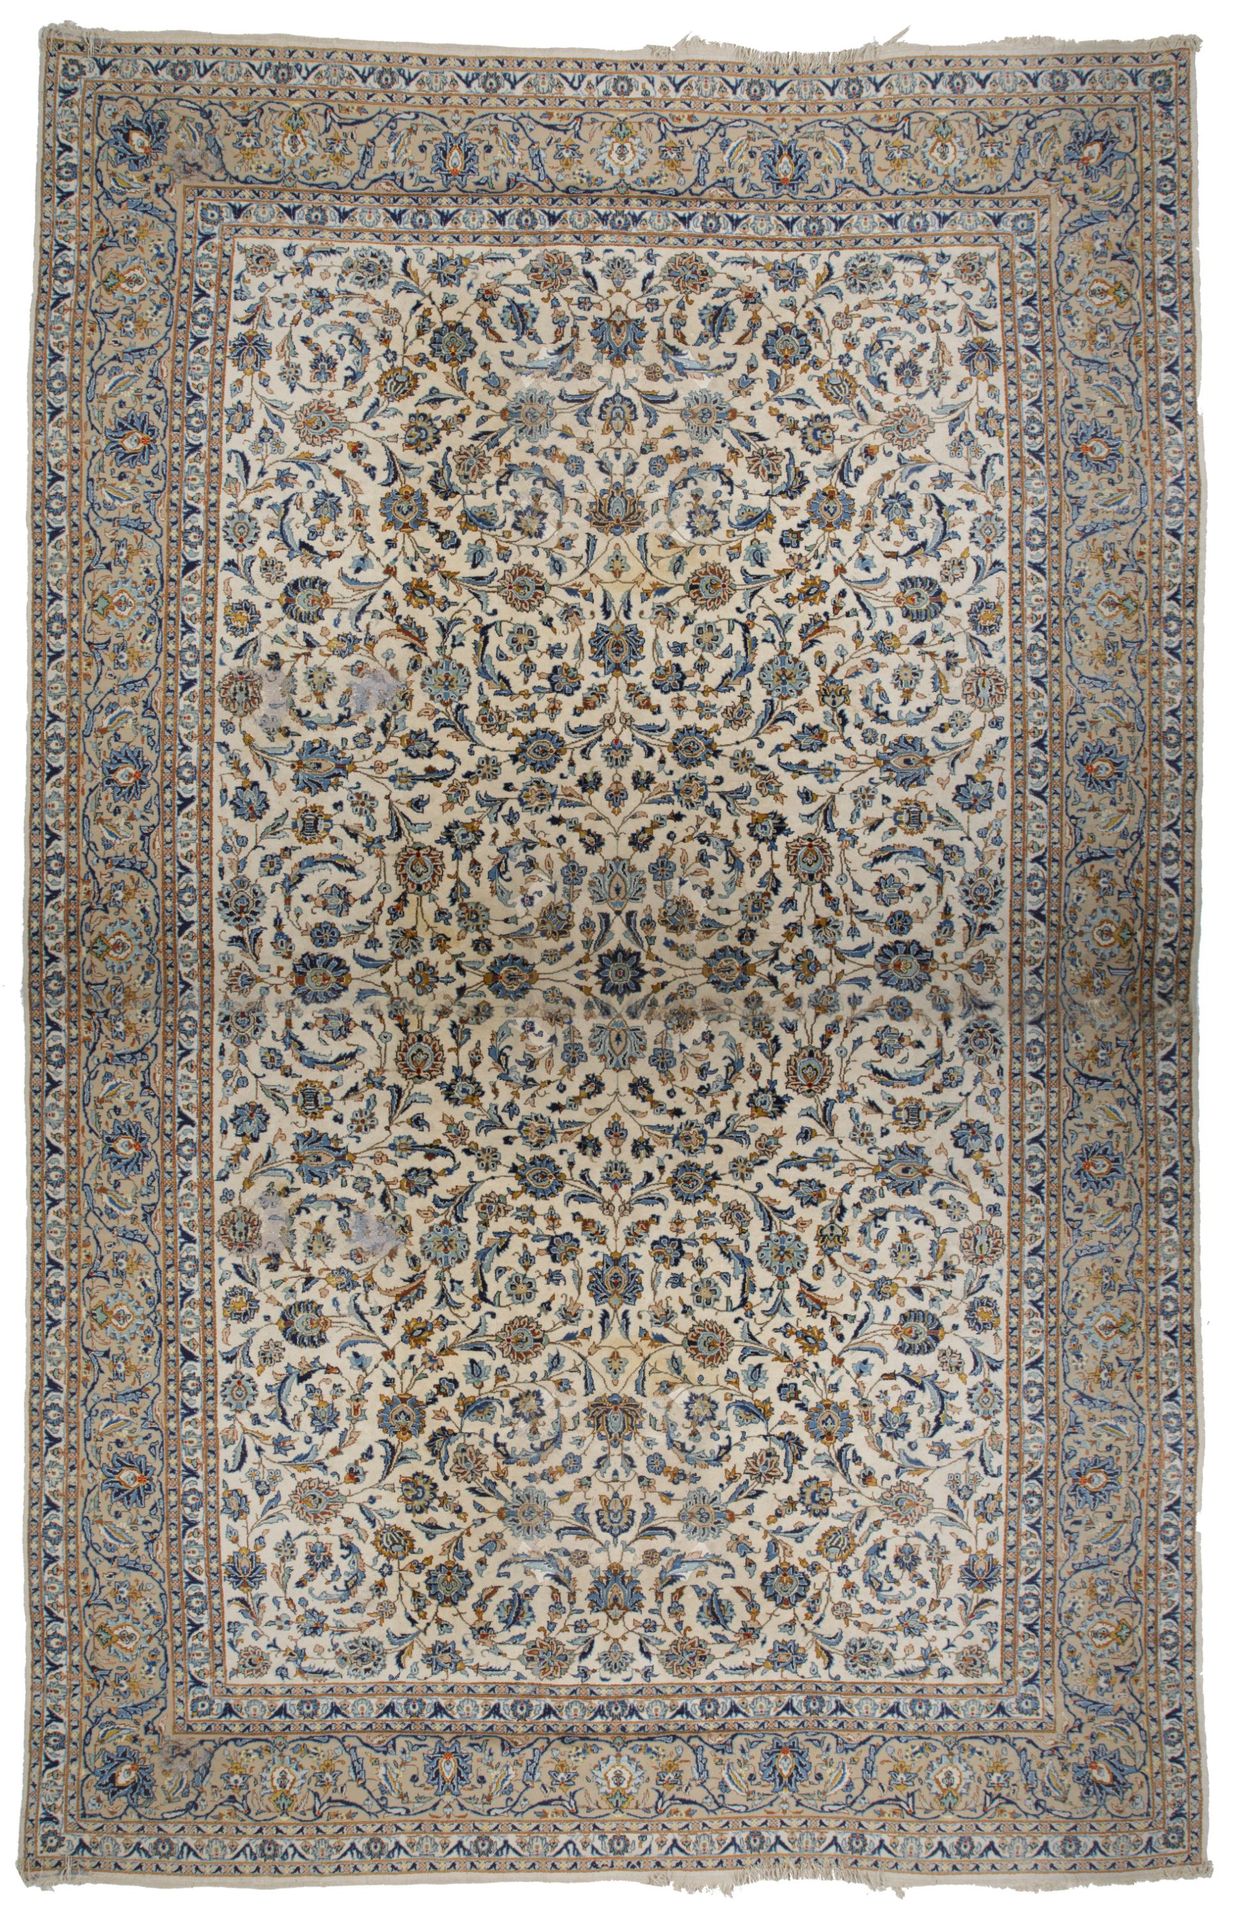 Persian hand-knotted wool rug, Kashan, mid 20th century. Campo grezzo e decorazi&hellip;